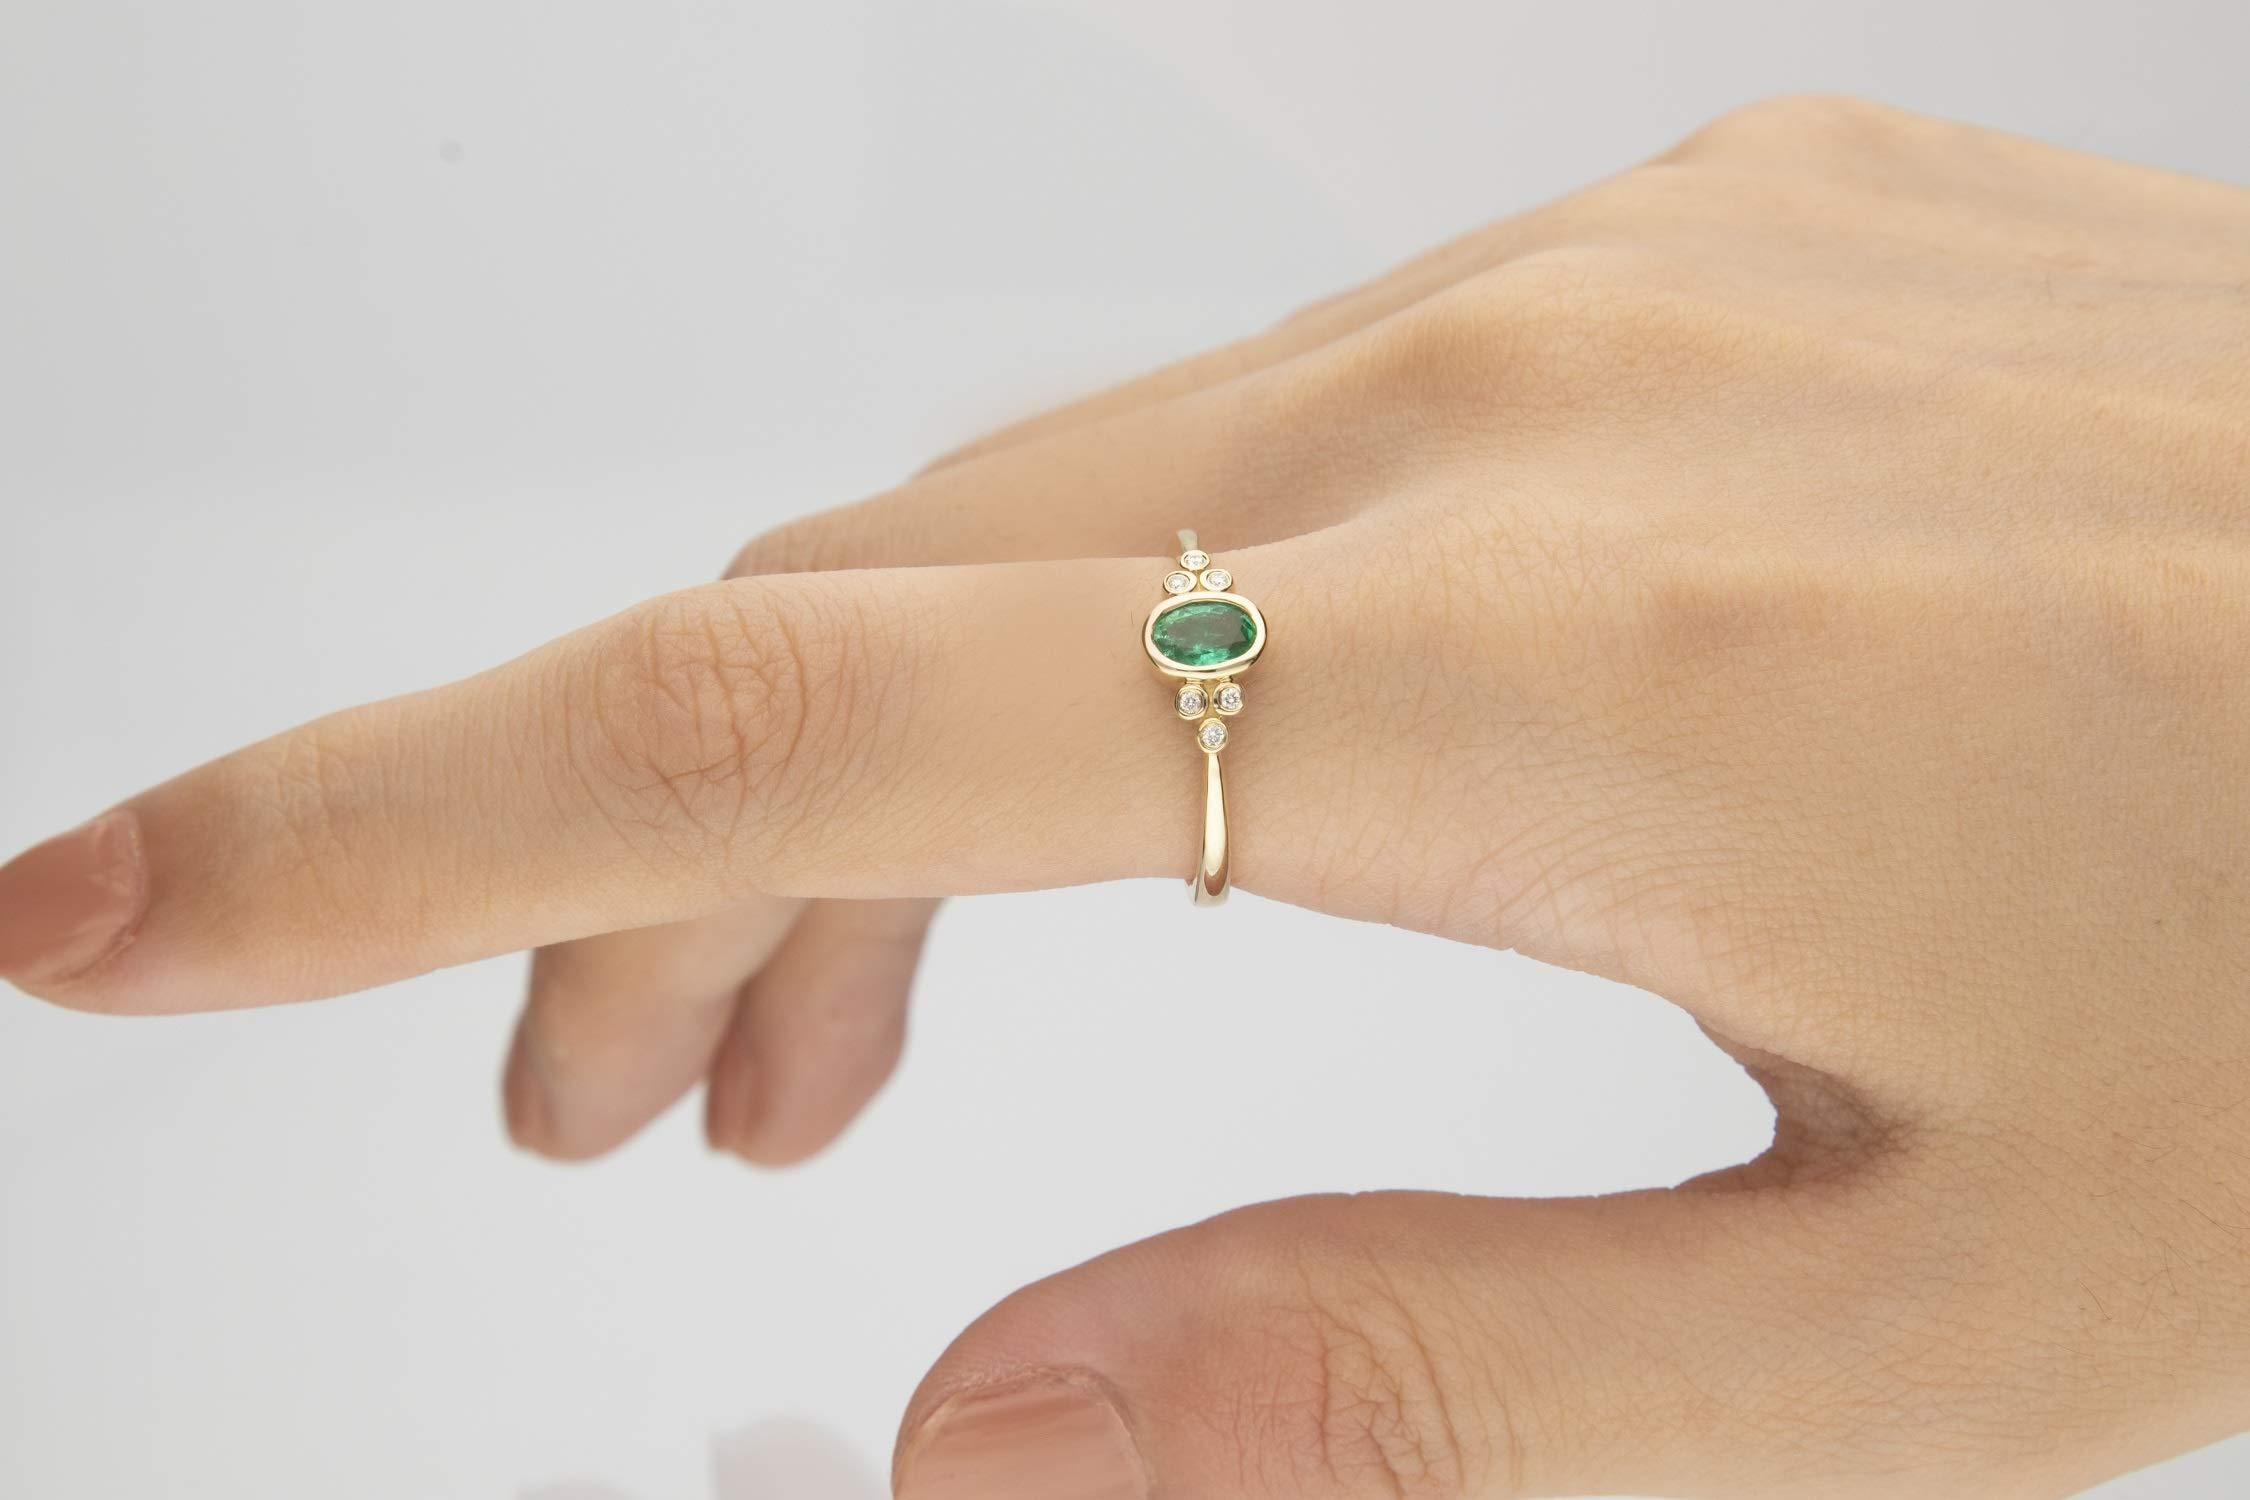 Stunning, timeless and classy eternity Unique ring. Decorate yourself in luxury with this Gin & Grace ring. The 10k Yellow Gold jewelry boasts 4X6 Oval-Cut Bezel Setting Natural Emerald (1pcs) 0.45 Carat and Round-Cut Bezel Setting Diamond (6pcs)